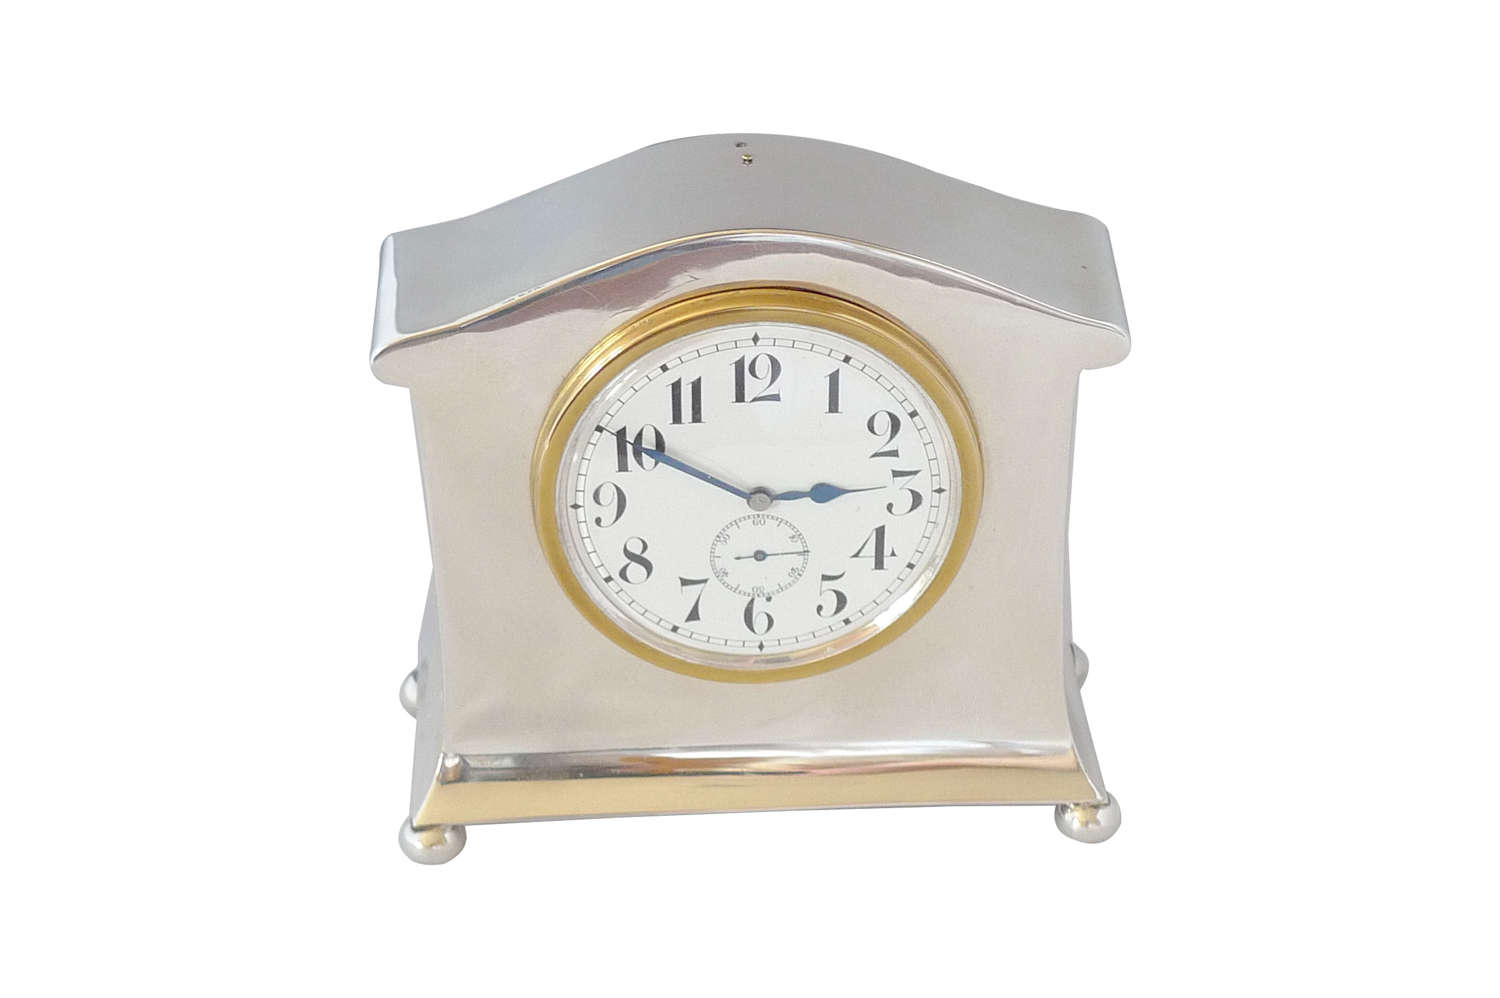 A Walker & Hall Desk Clock Hallmarked for Silver Chester